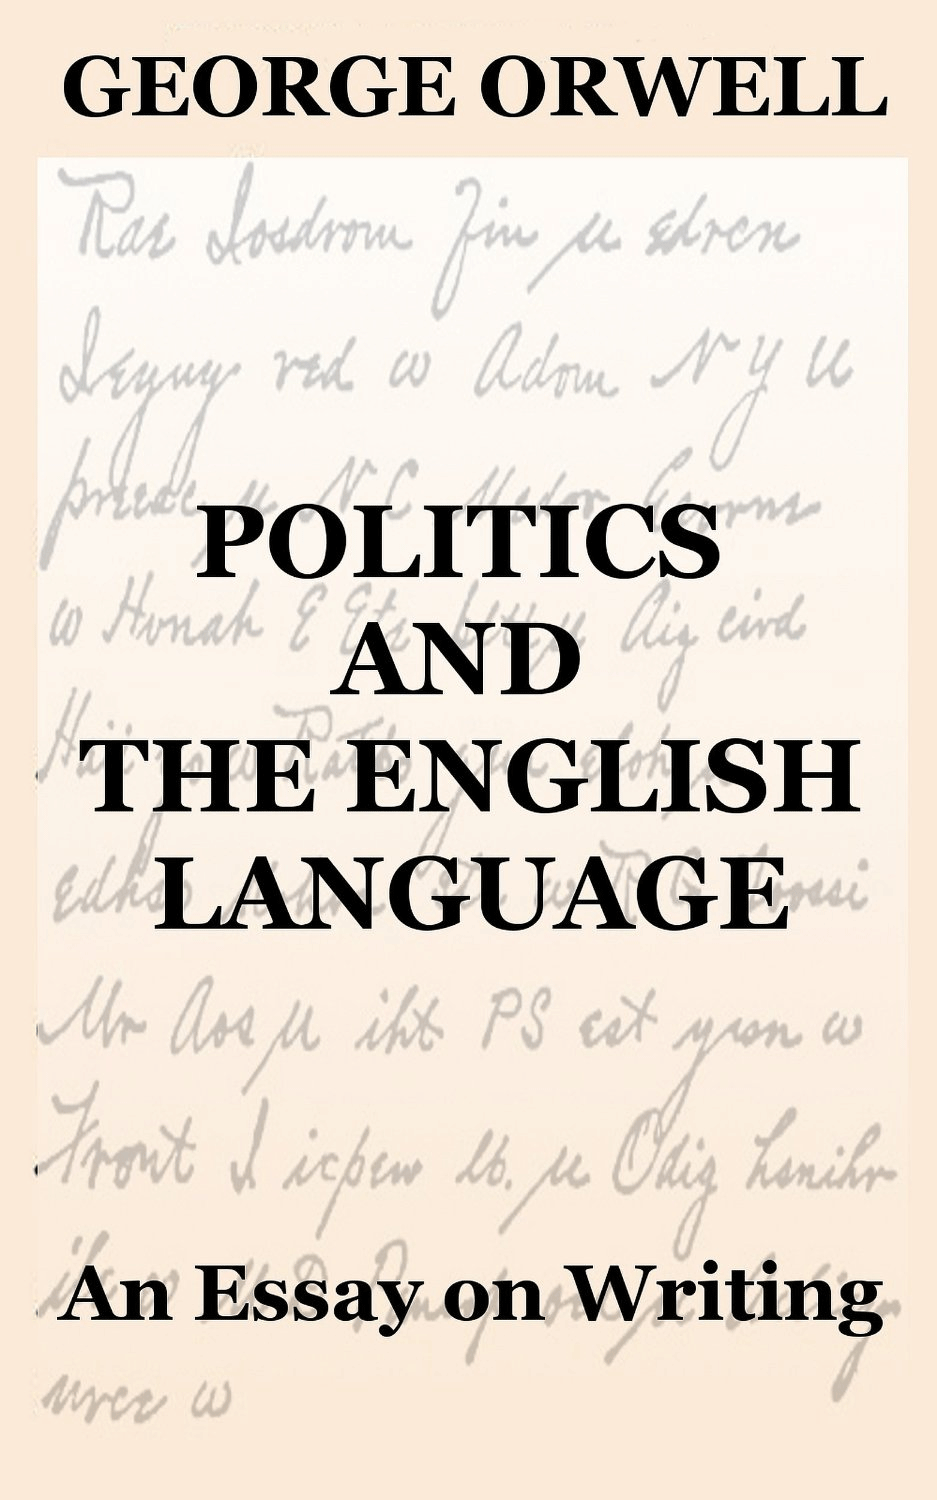 Image result for politics and the english language